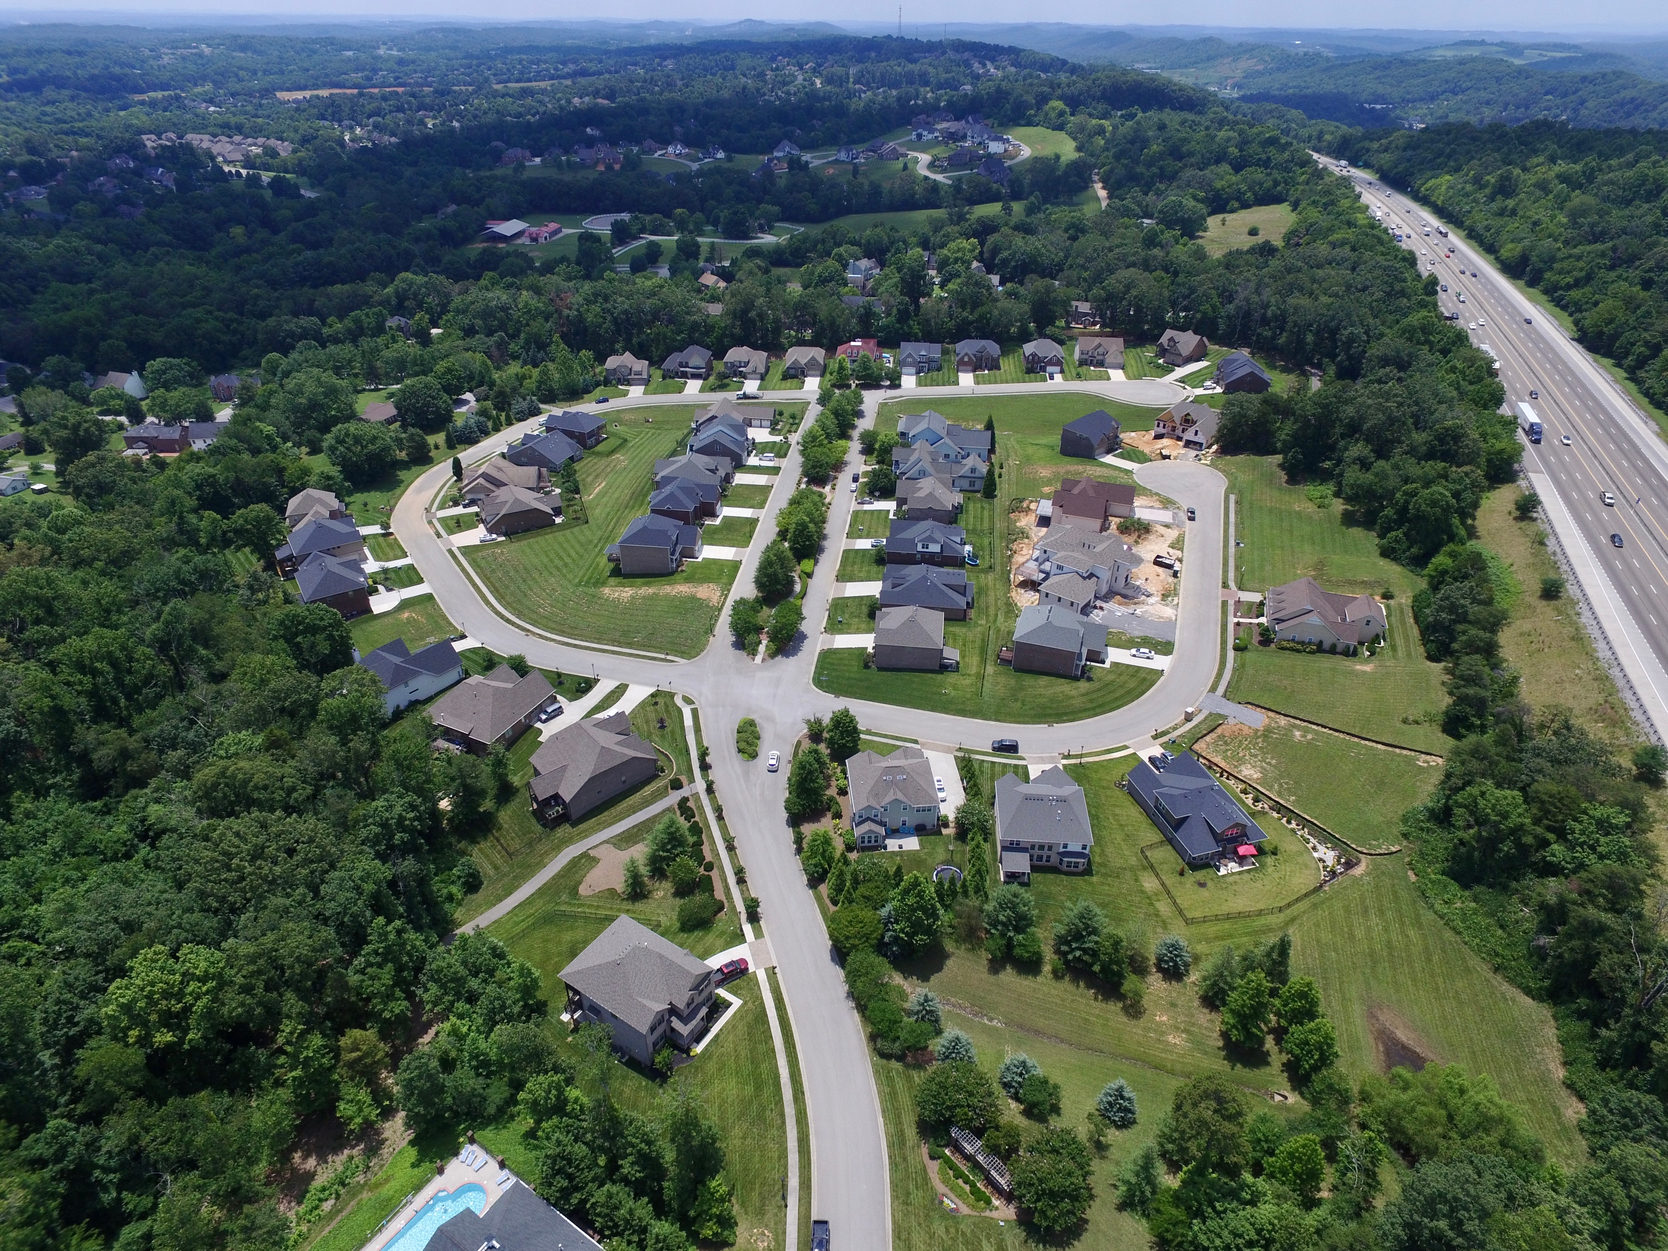 Aerial view of  homes in a Knoxville neighborhood